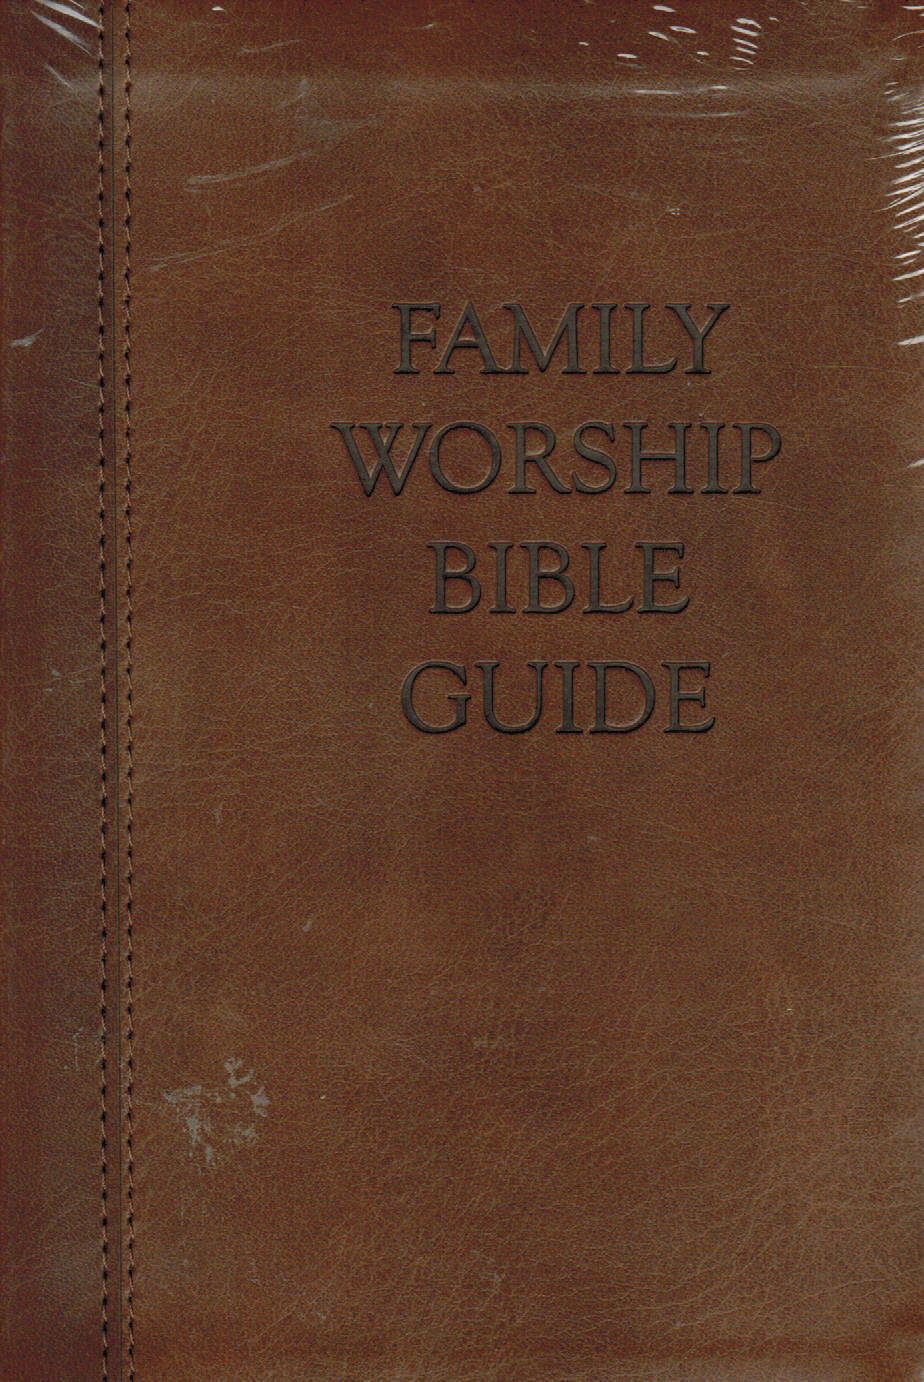 Family Worship Bible Guide (Imitation Leather)